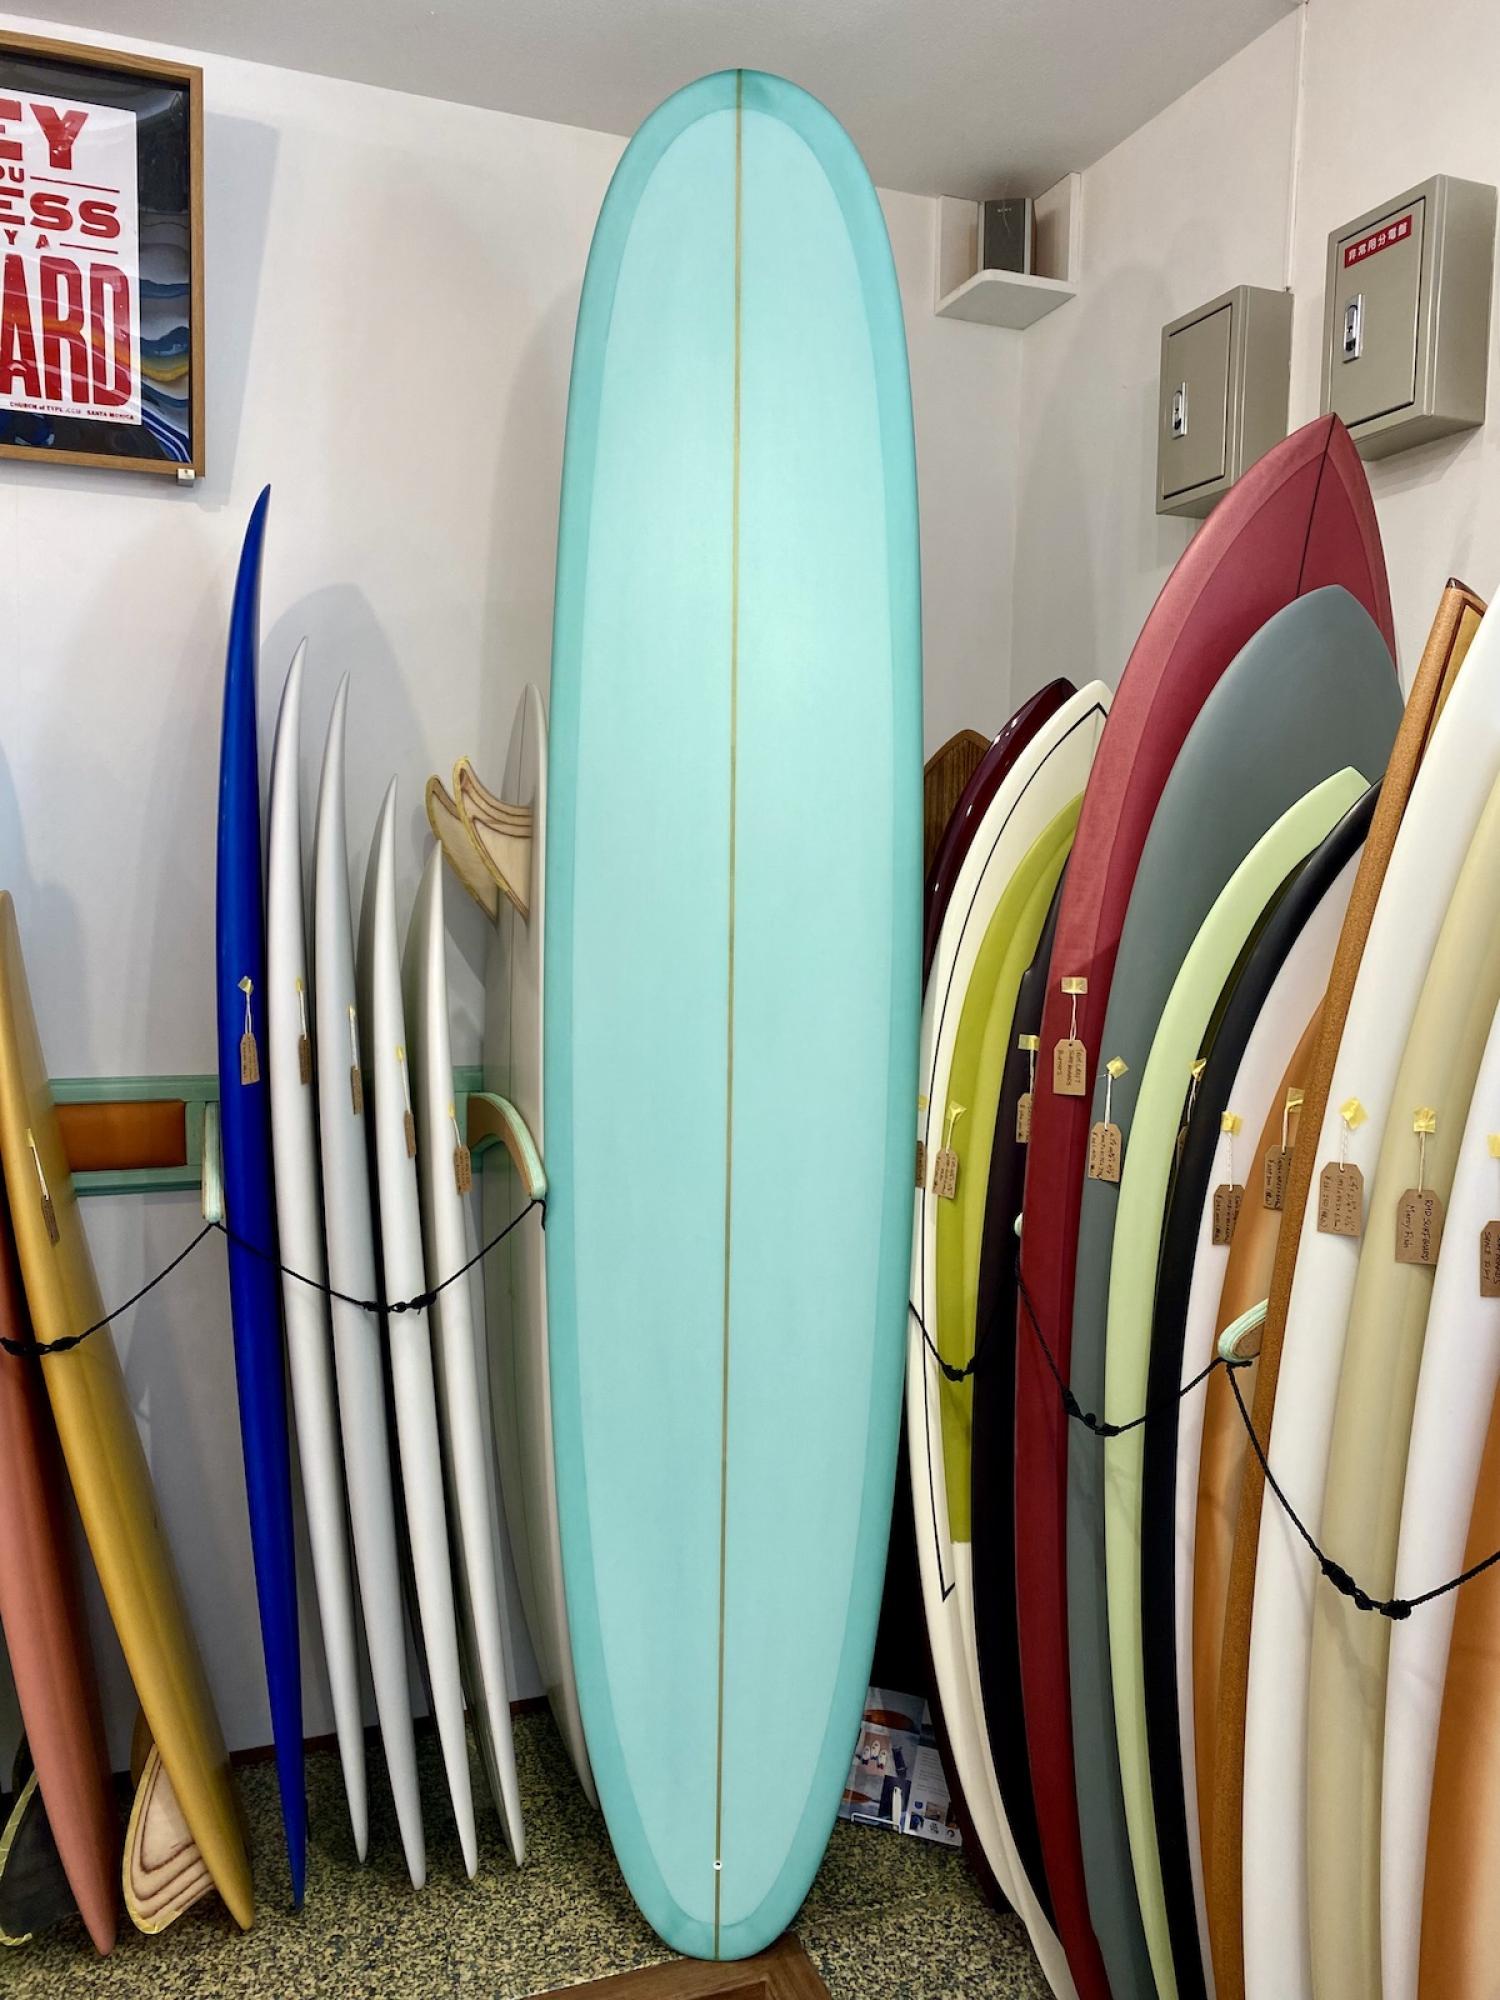 RMD SURFBOARD 9.0 Leopard　Scheduled to arrive in mid-April